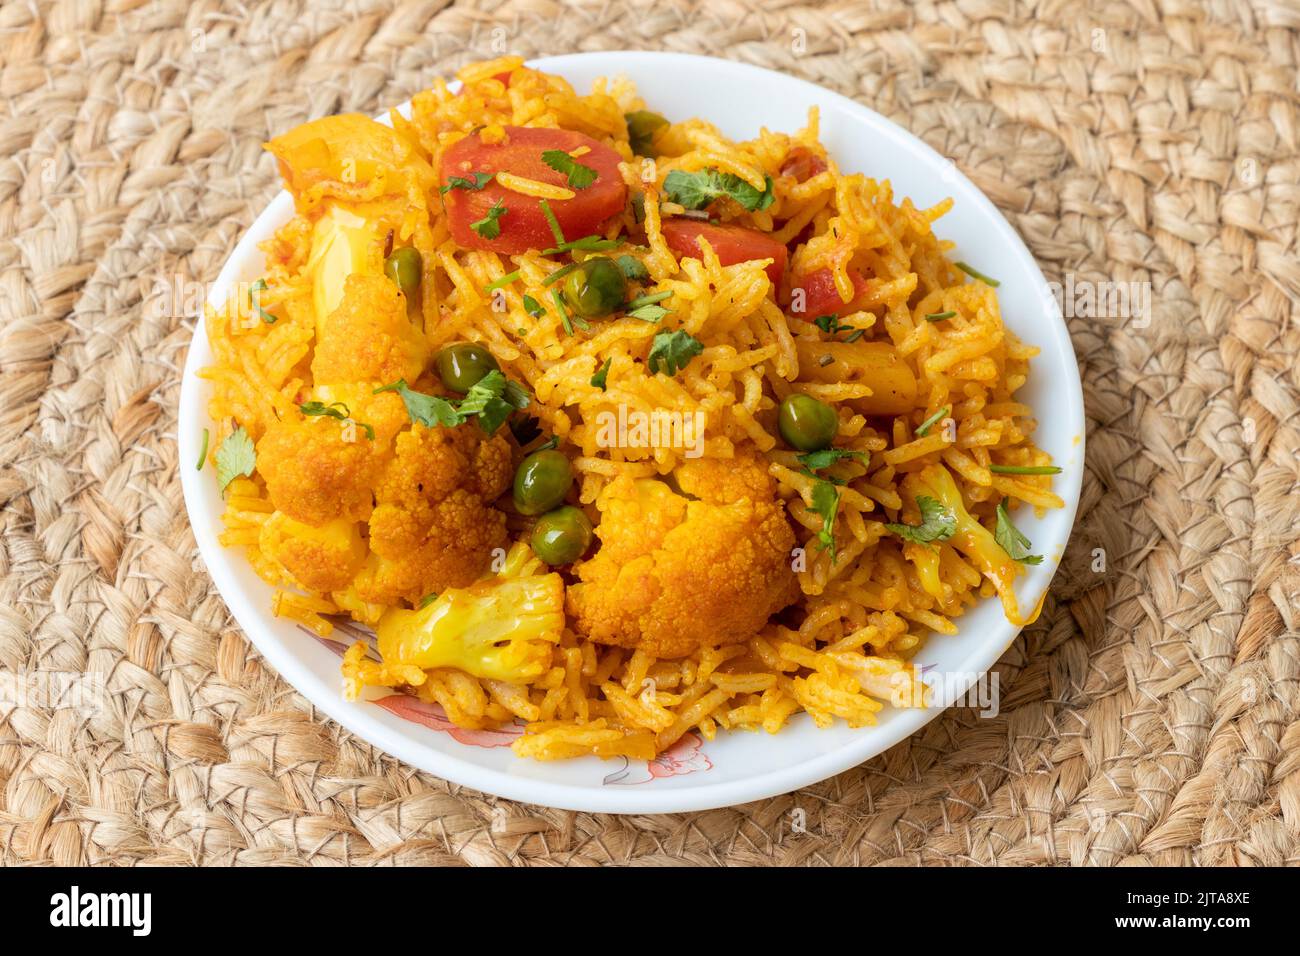 Indian vegetarian fried rice in the plate with carrot, spring onion, green peas, colliflower Stock Photo